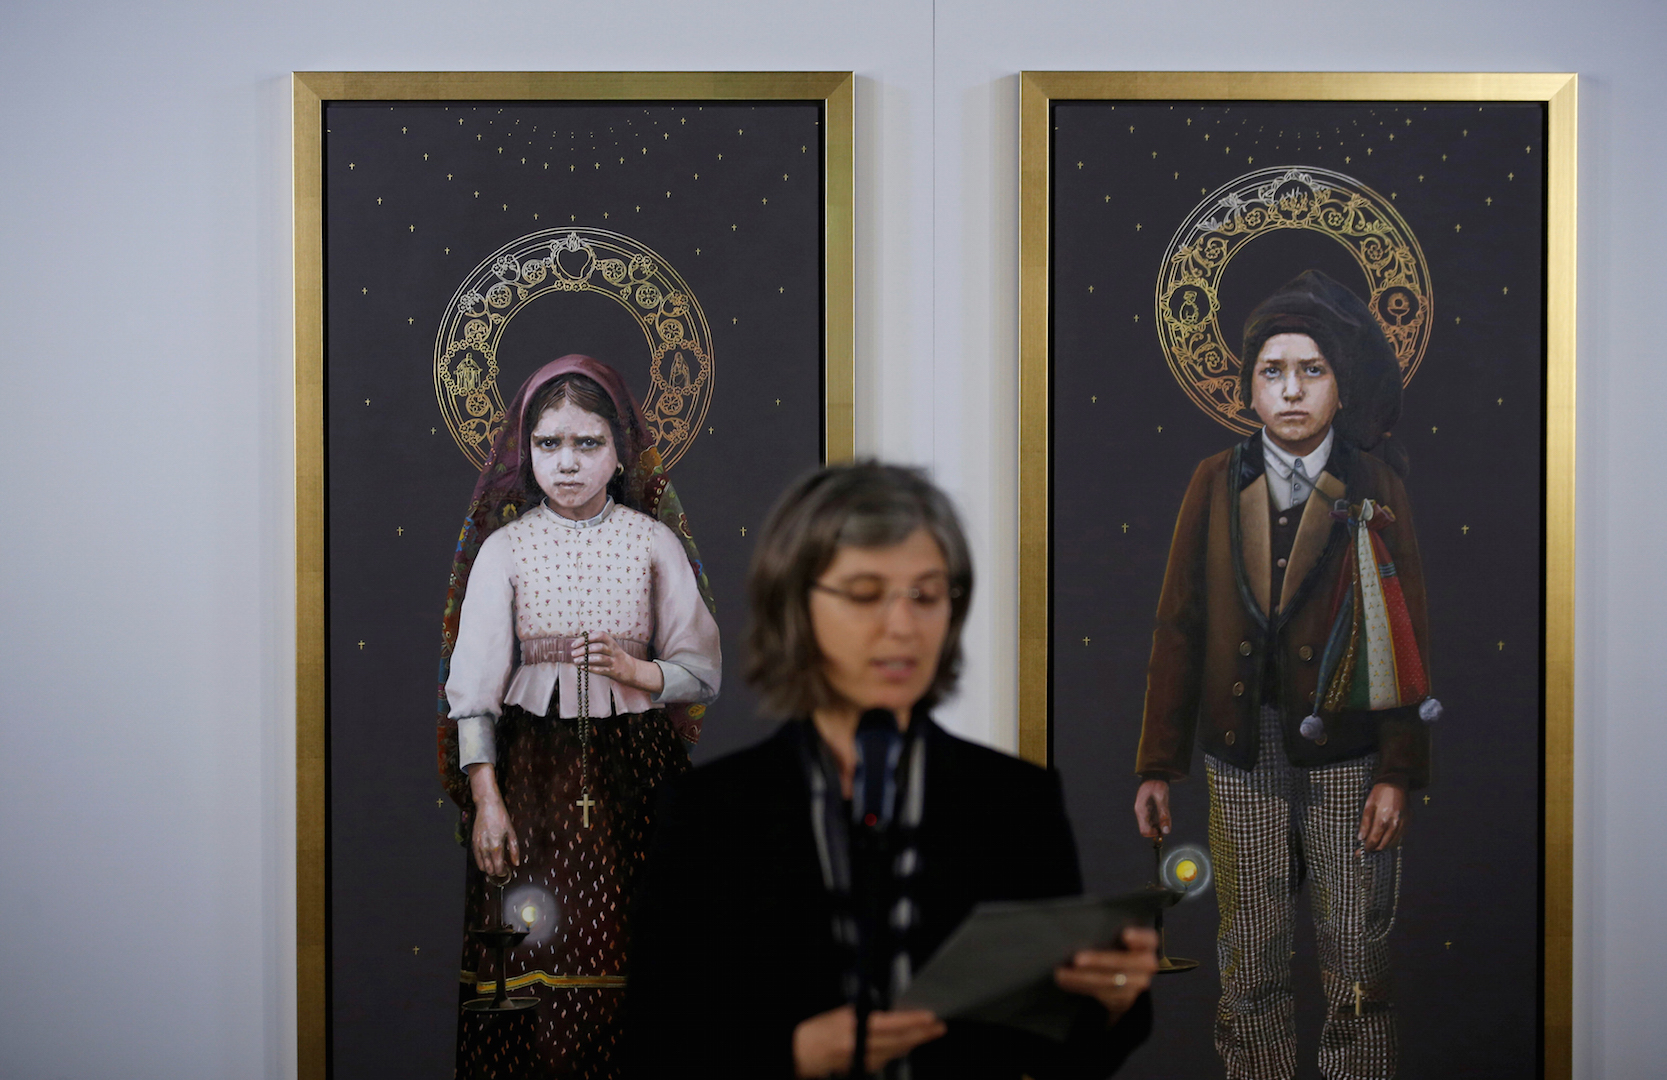 Two paintings of Blessed Jacinta Marto and Blessed Francisco Marto are presented during a May 8 news conference in Fatima, Portugal (CNS photo/Rafael Marchante, Reuters).